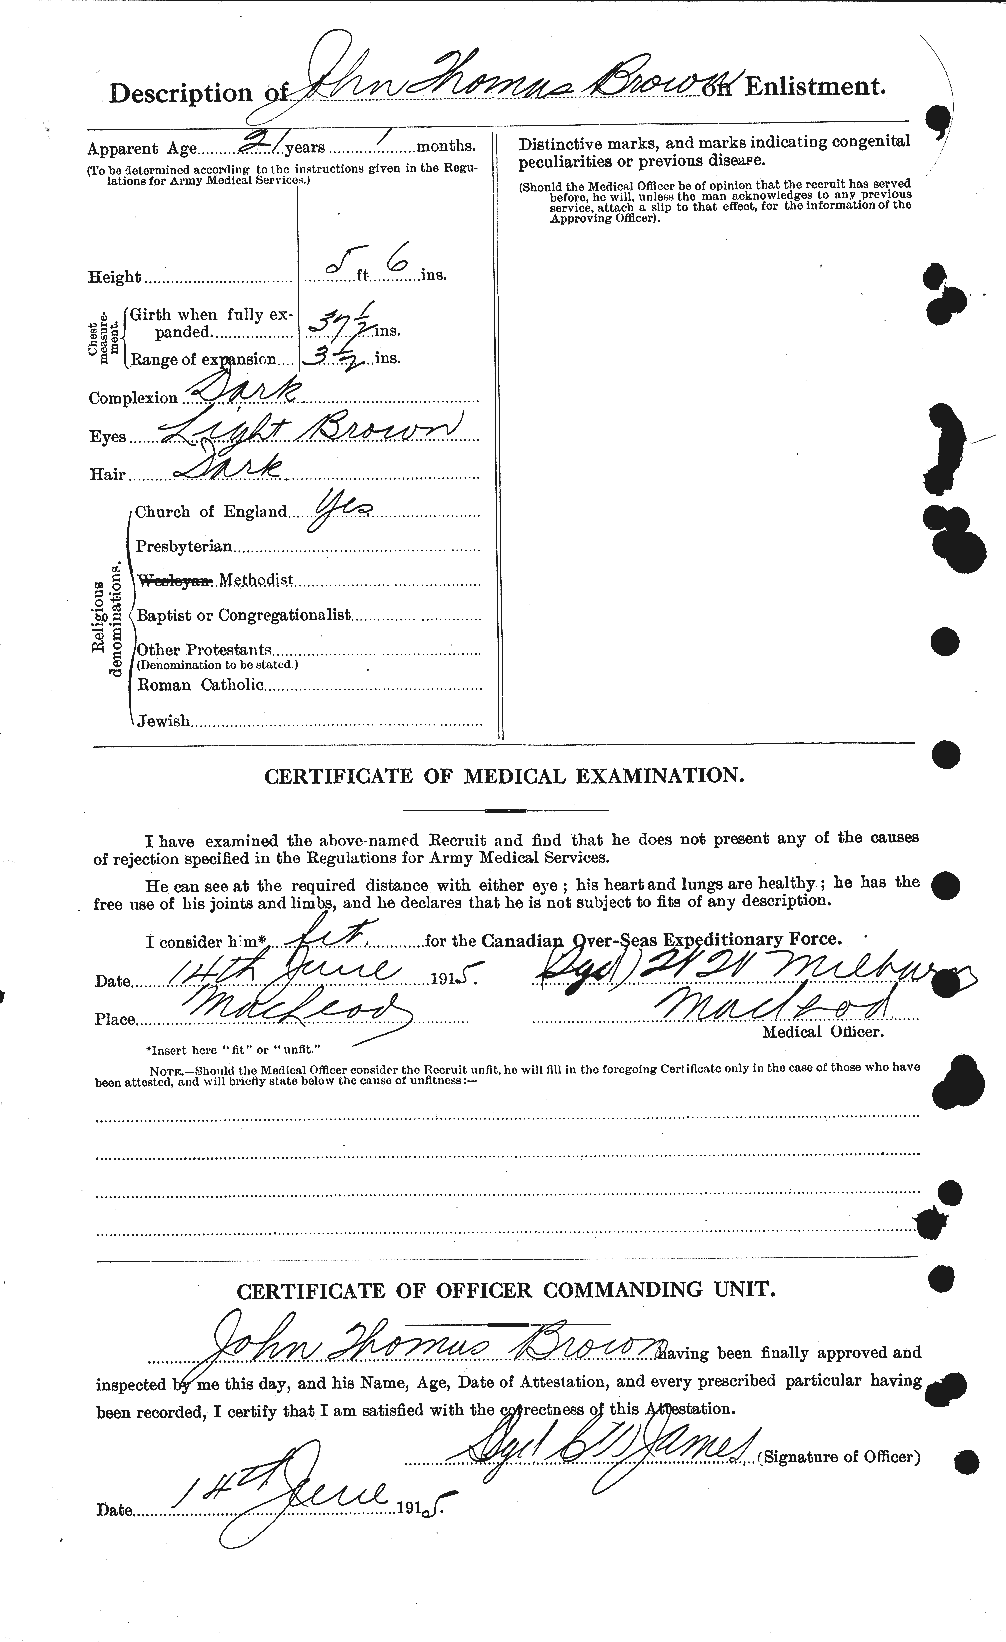 Personnel Records of the First World War - CEF 265884b